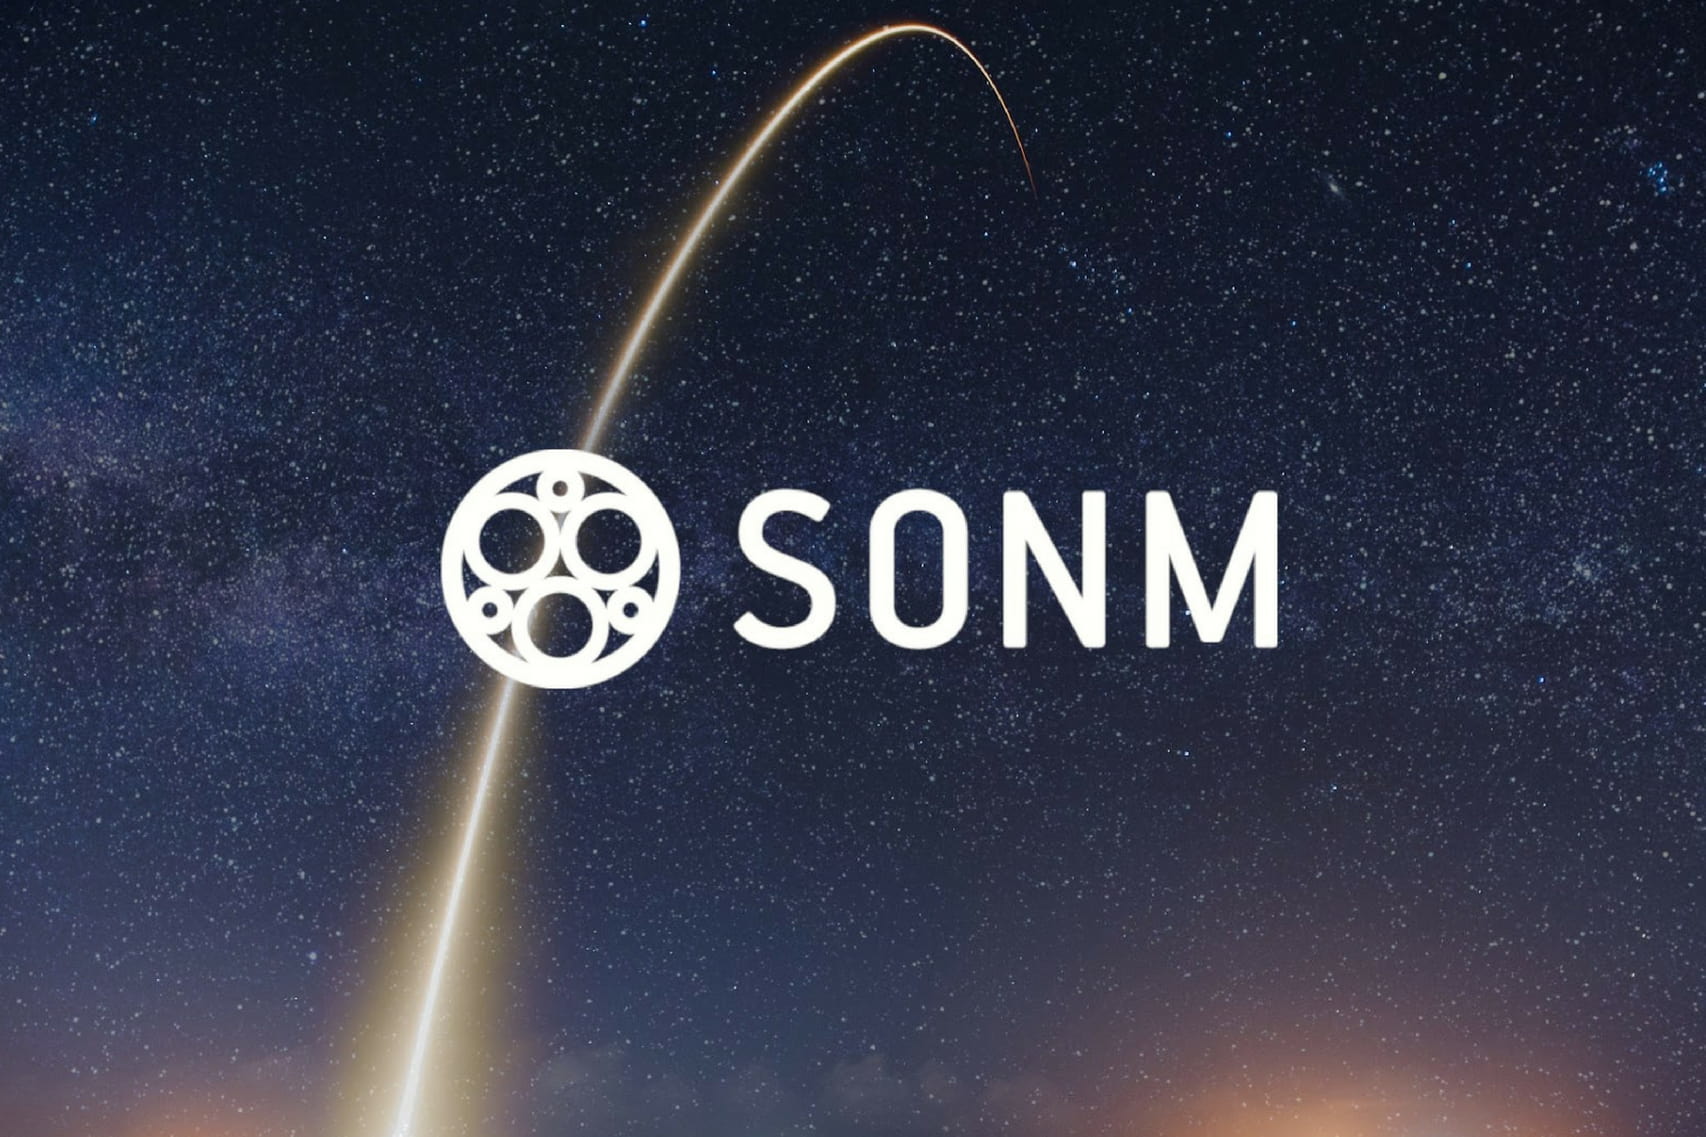 SOMN is Now Live!